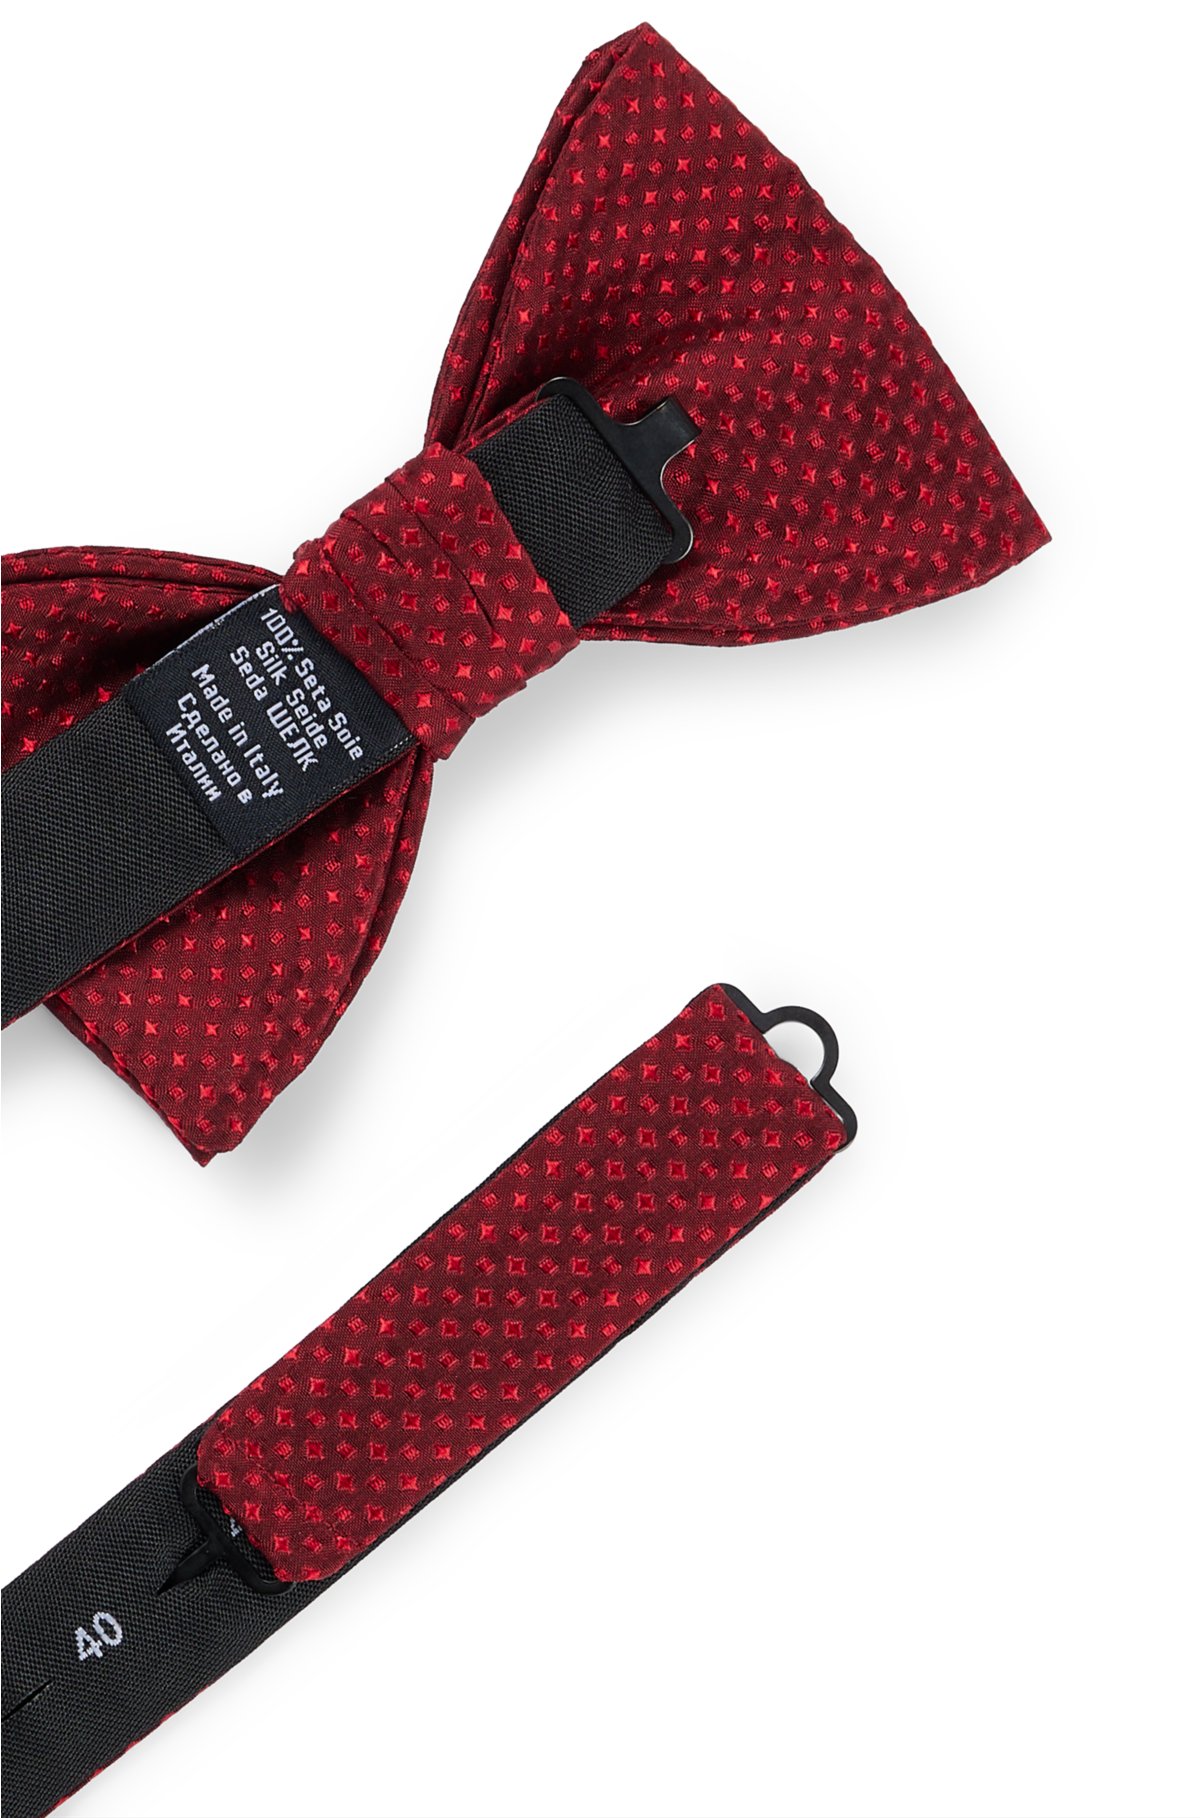 Red Bow Tie with White Polka Dots, Valentine's Day Pre-Tied Bowtie AU